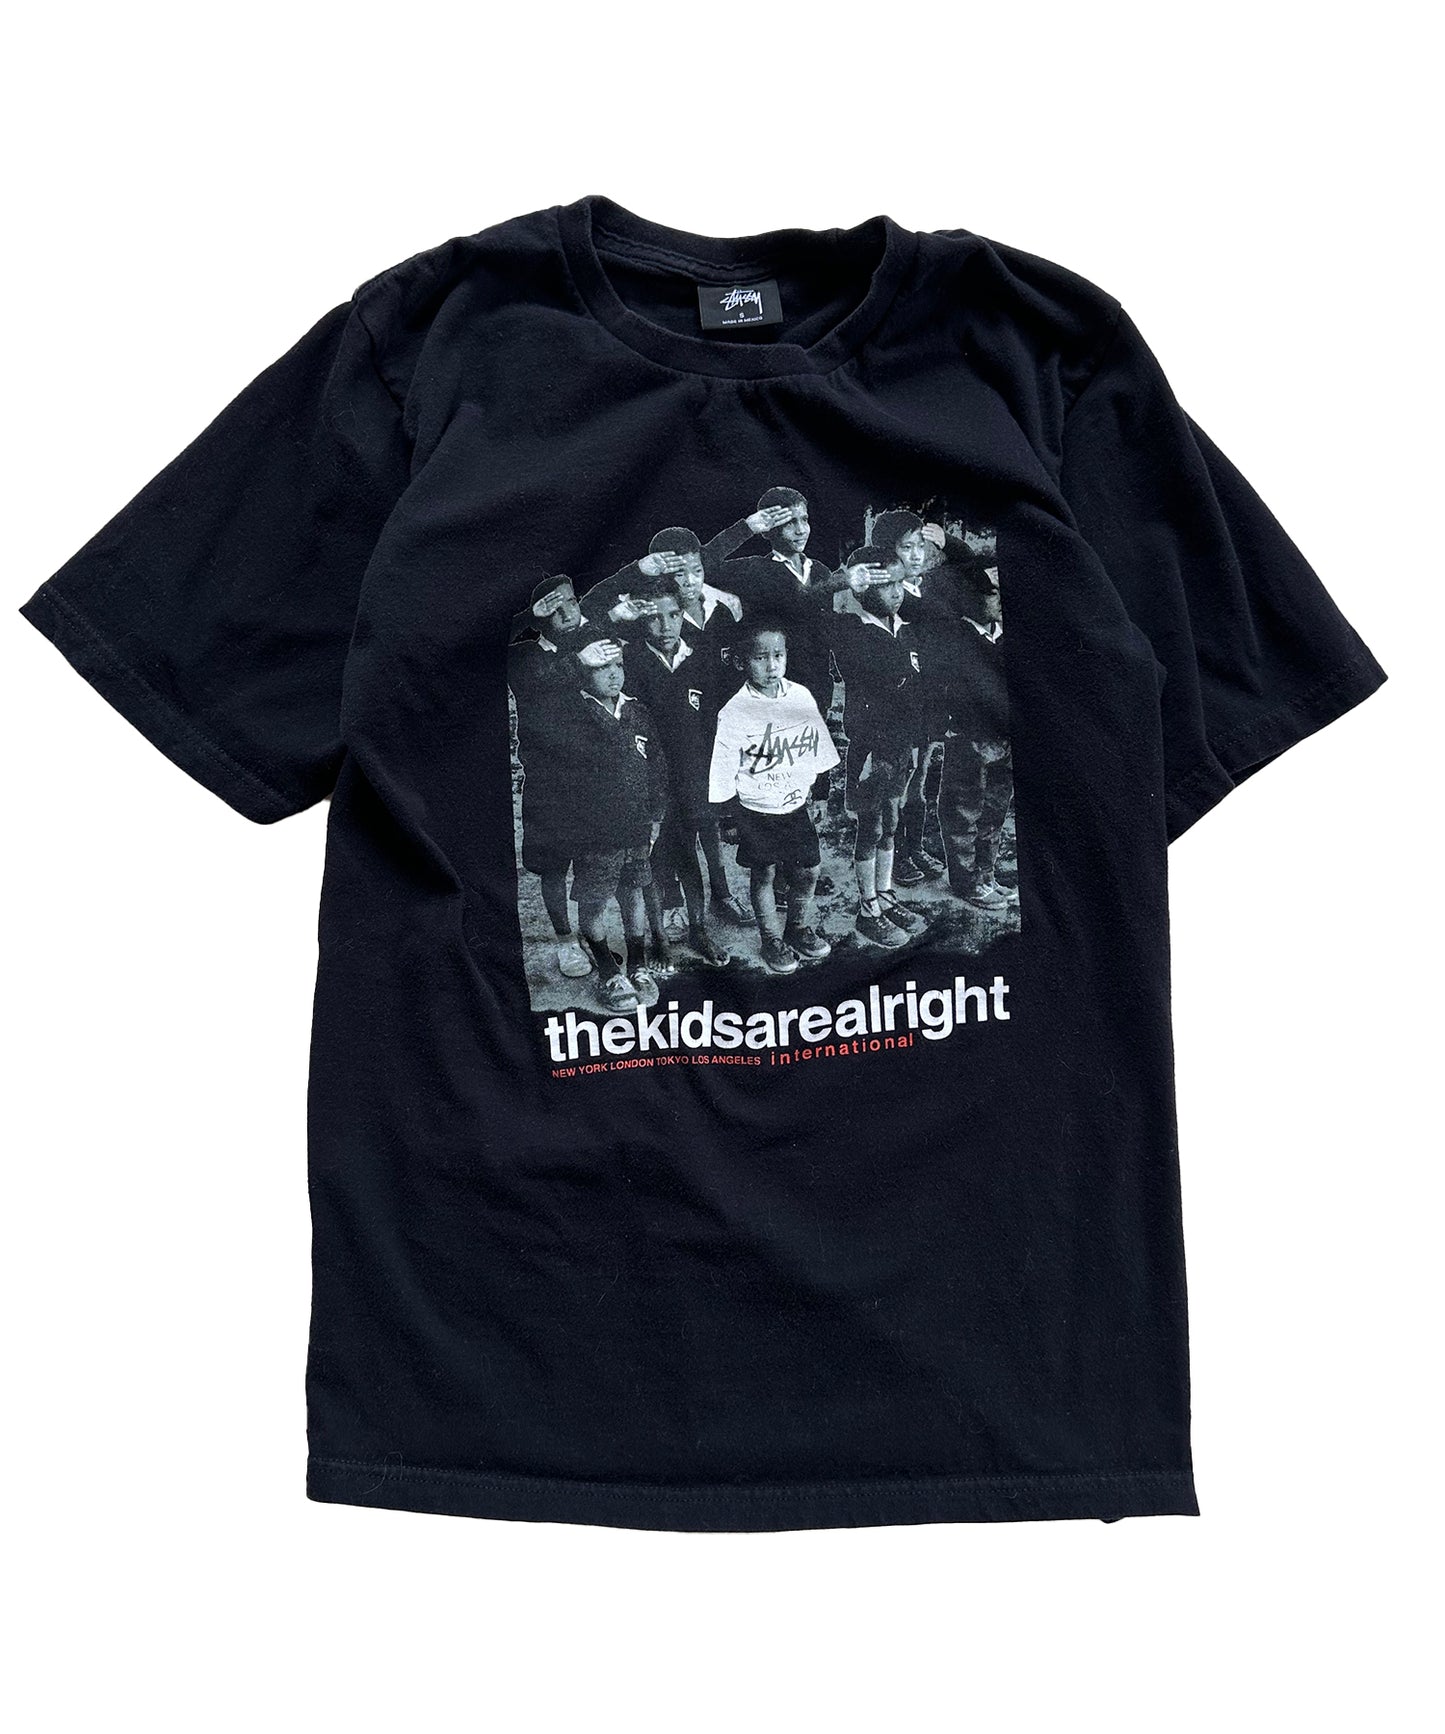 Stussy "The Kids Are Alright" Tee (Small)